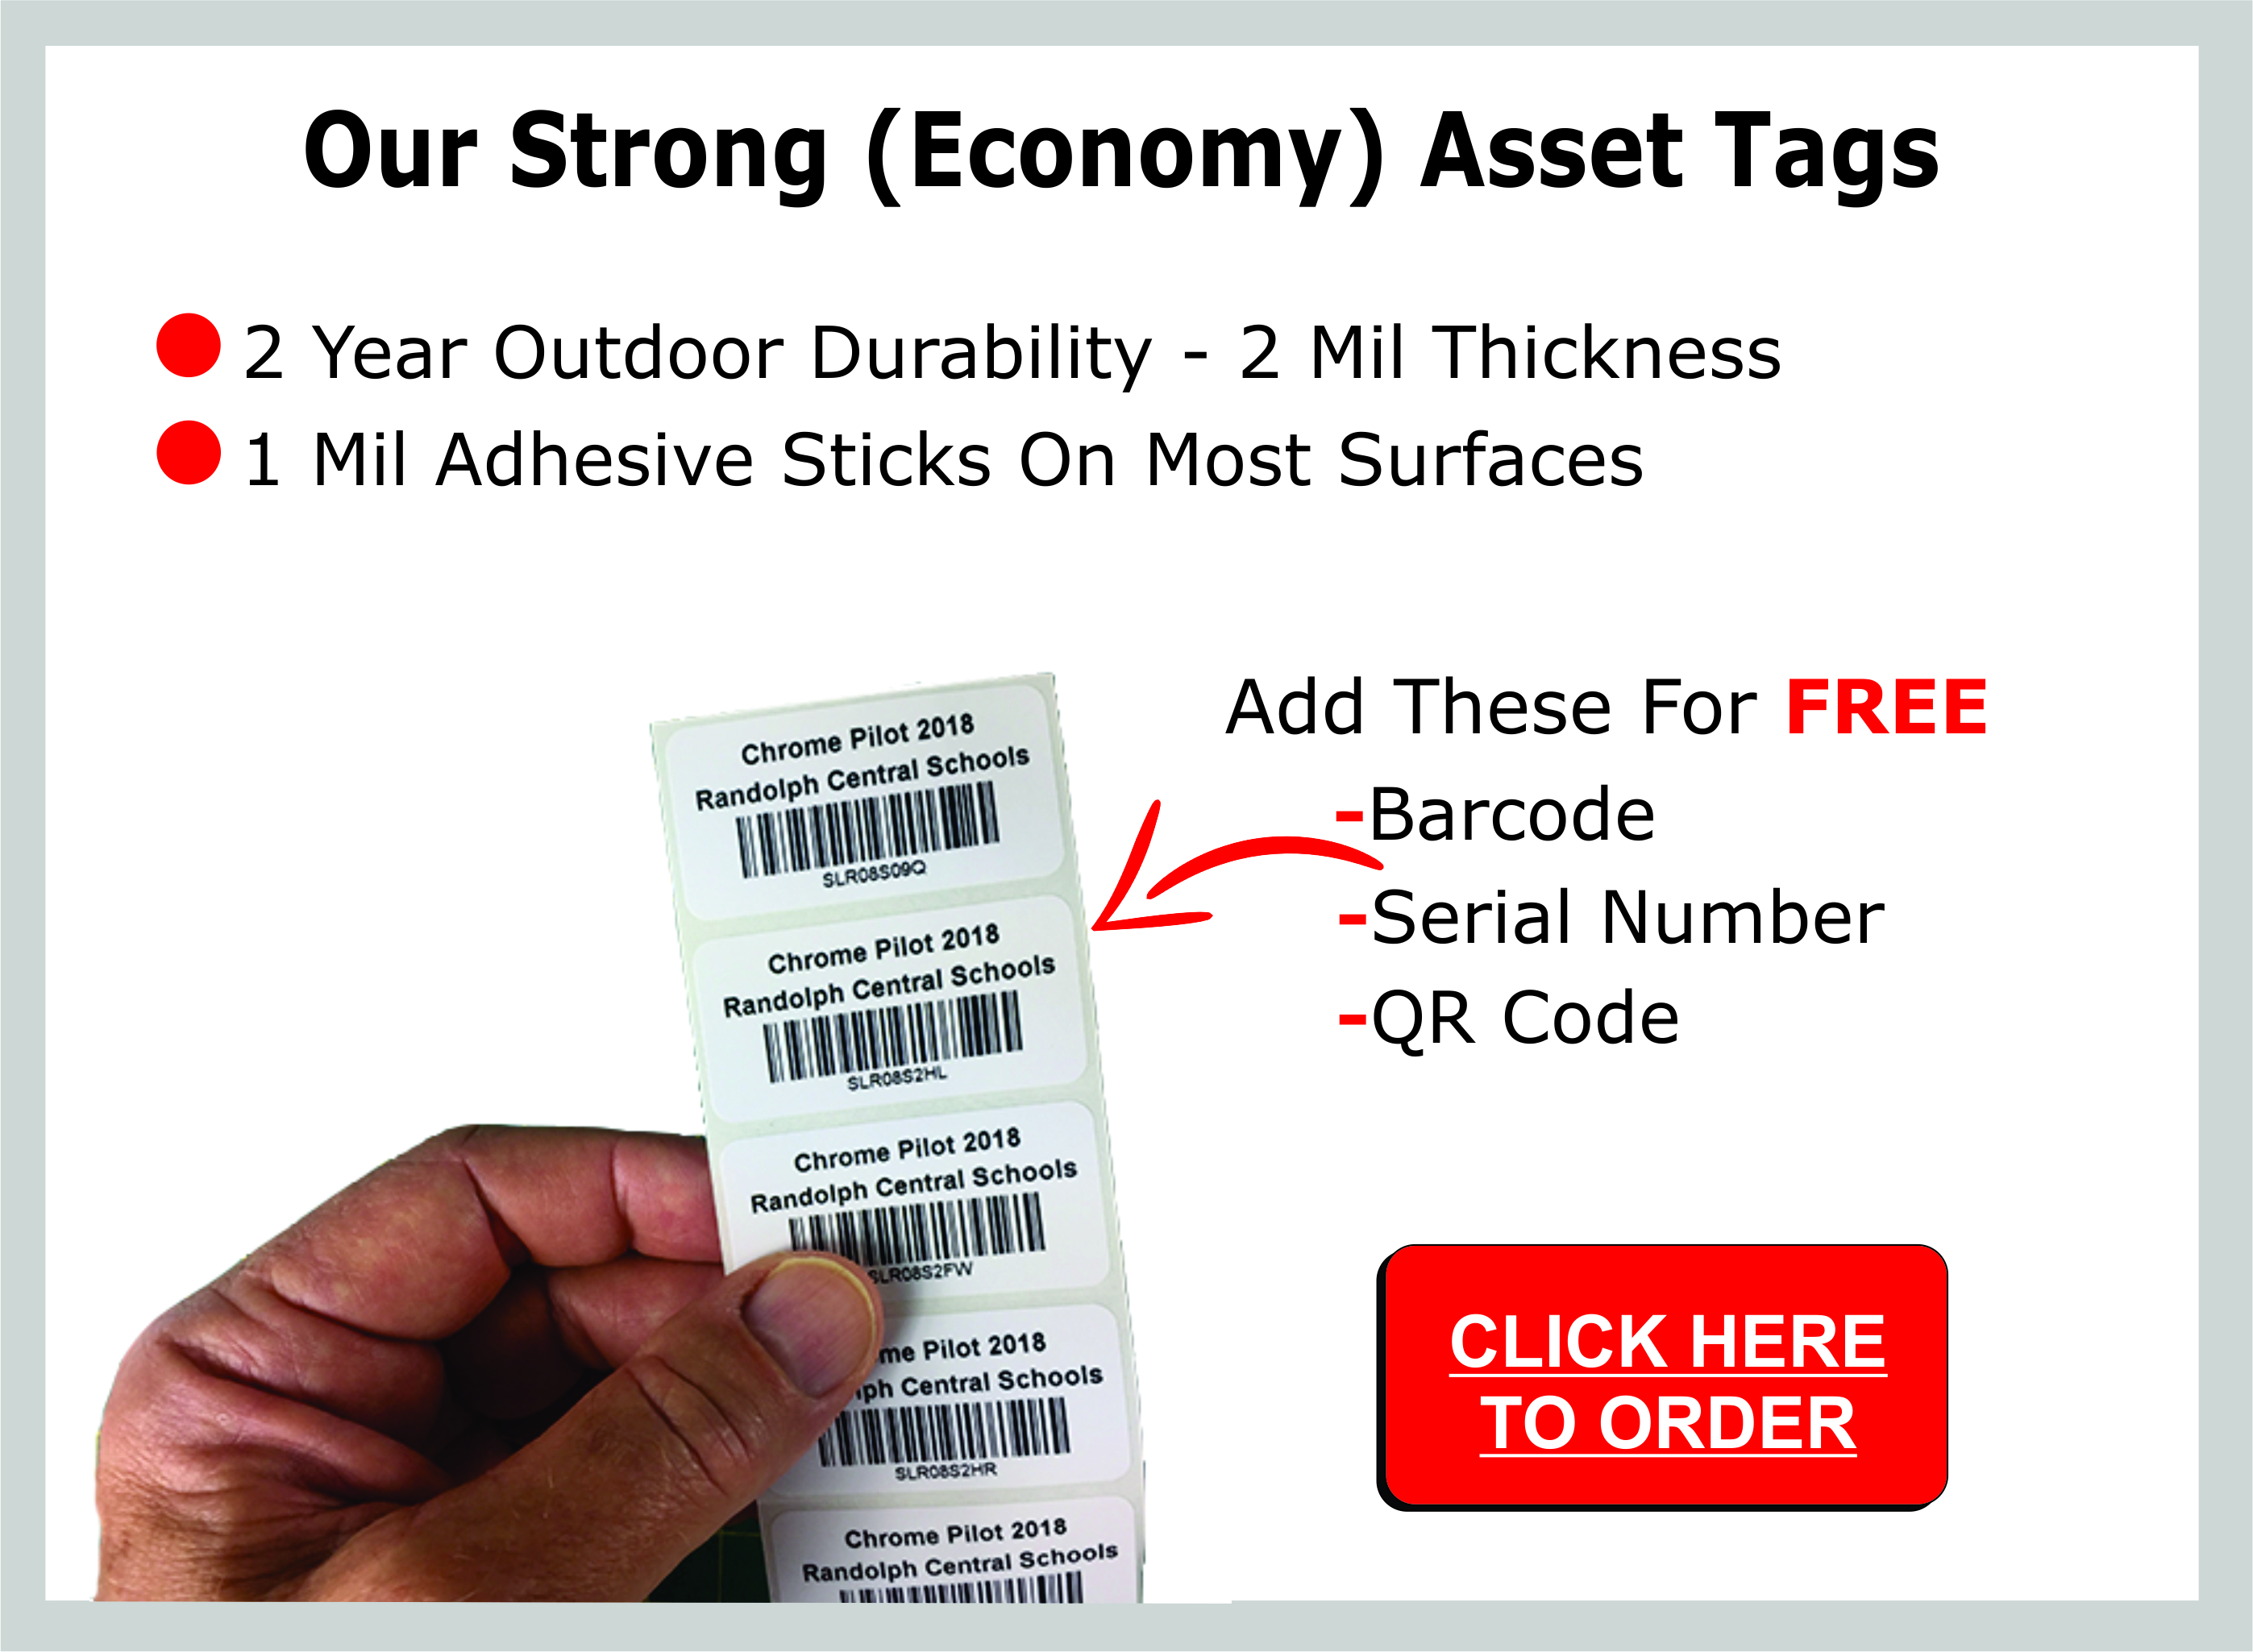 We make the strongest asset tags, and this shows our strongest strength level of asset tag.